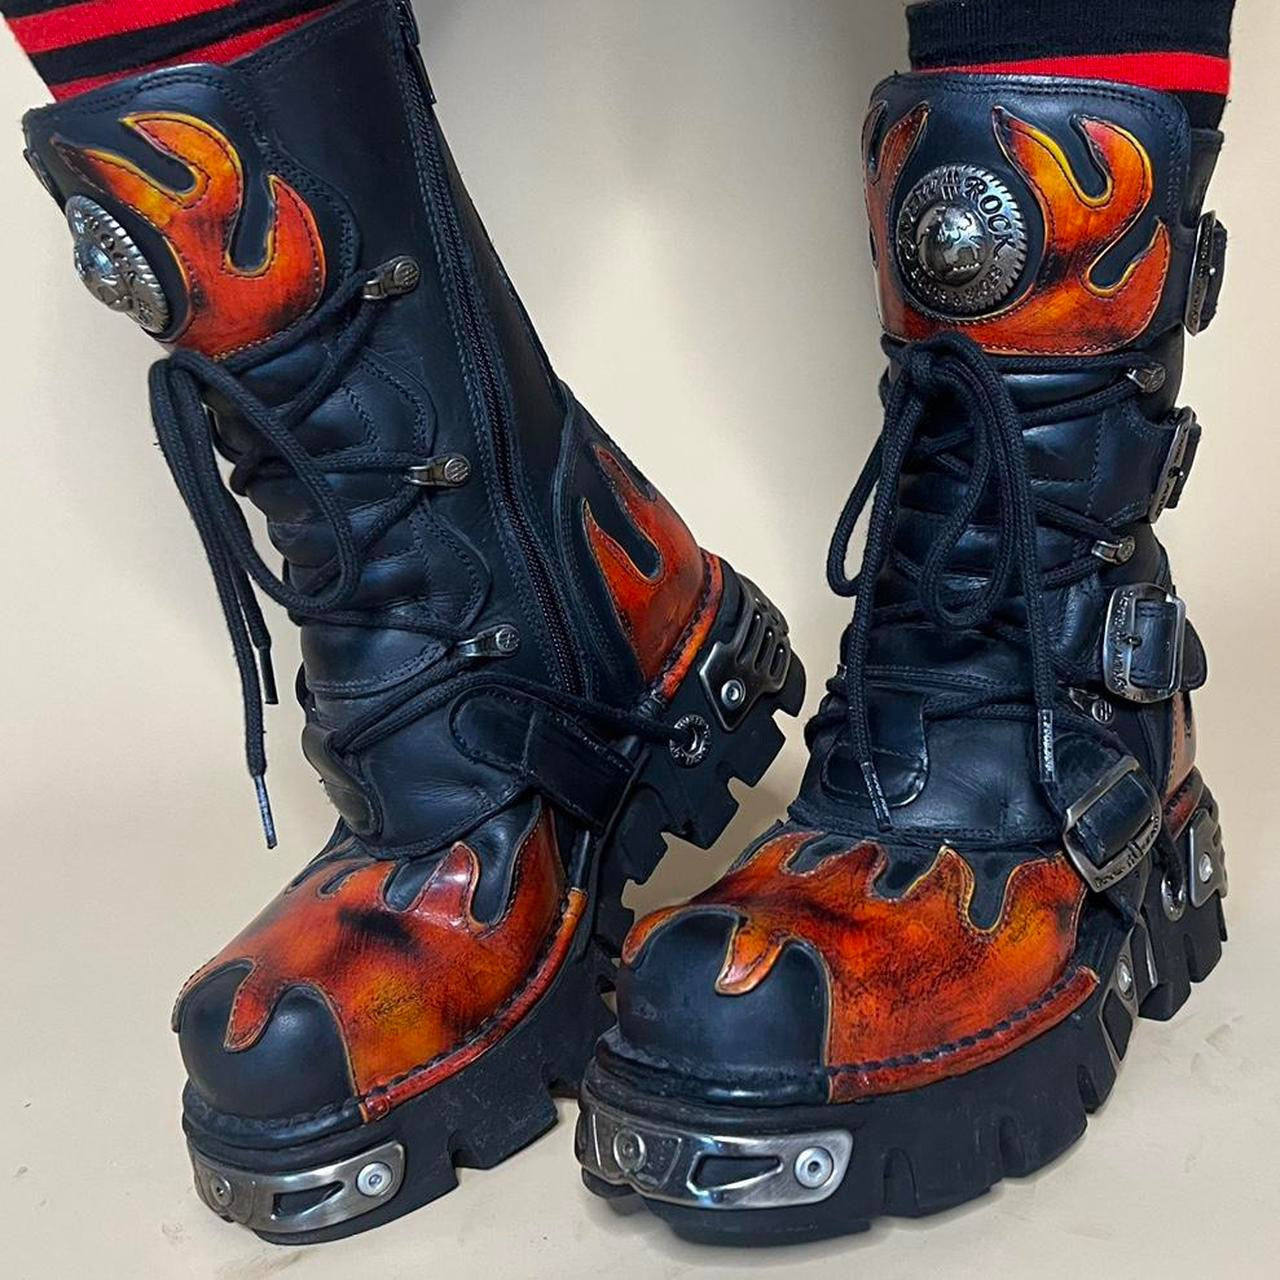 NEW ROCK Reactor flame boots